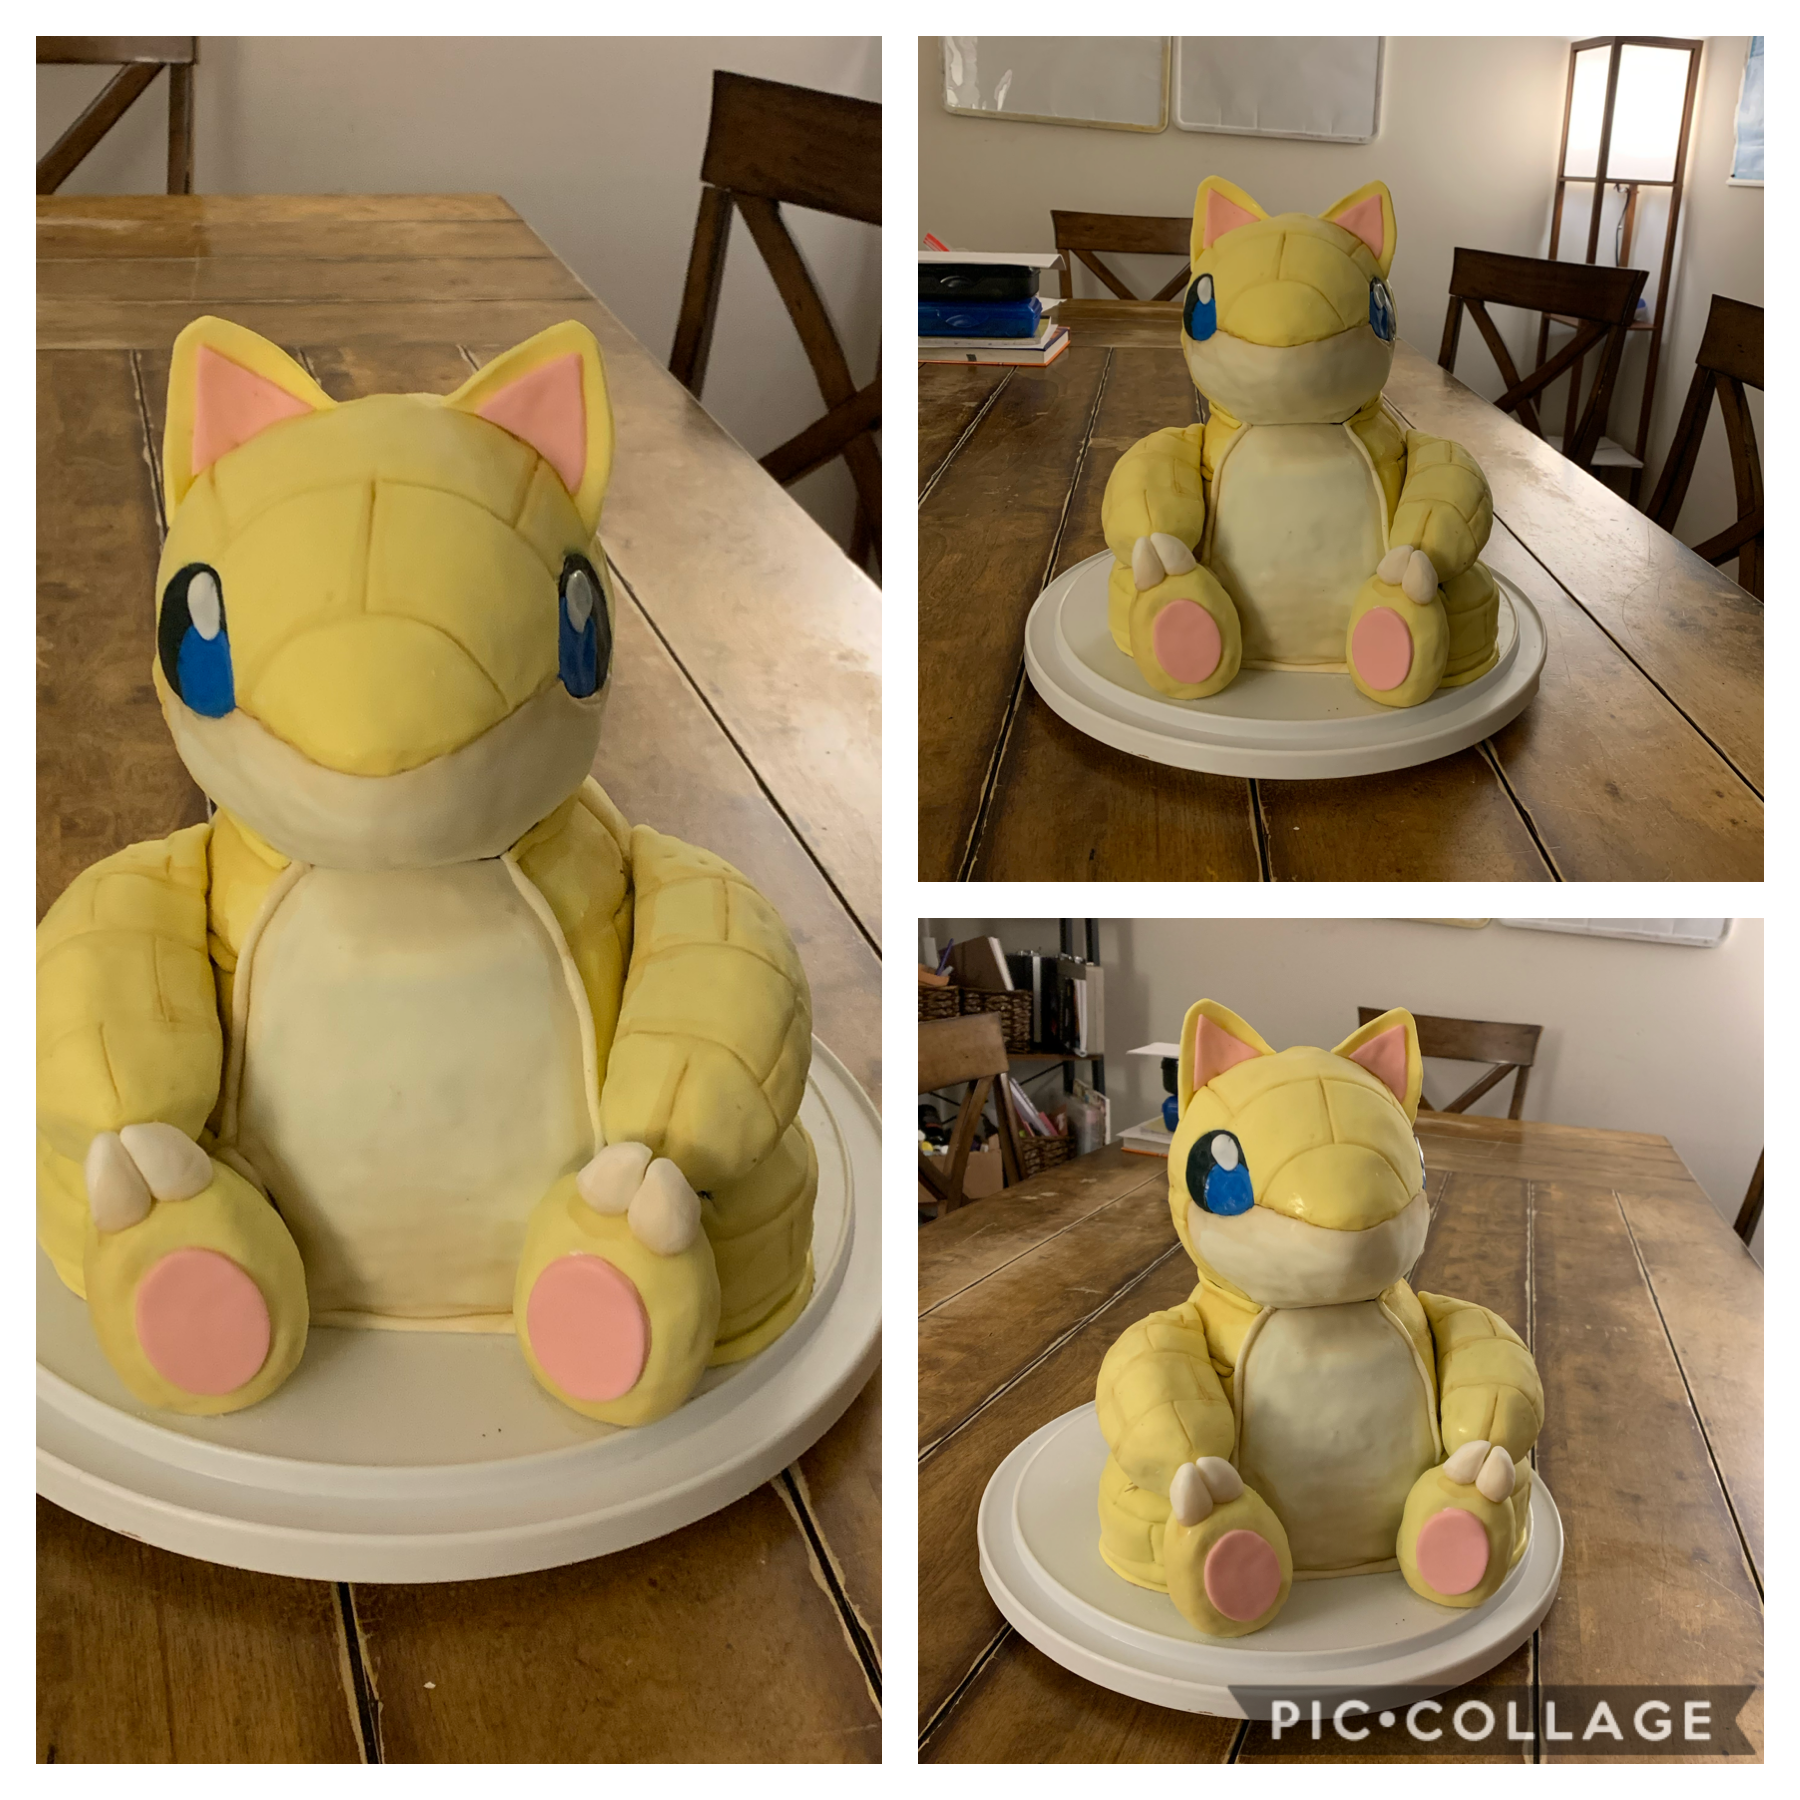 Made this Sandshrew cake for Father’s Day 😊